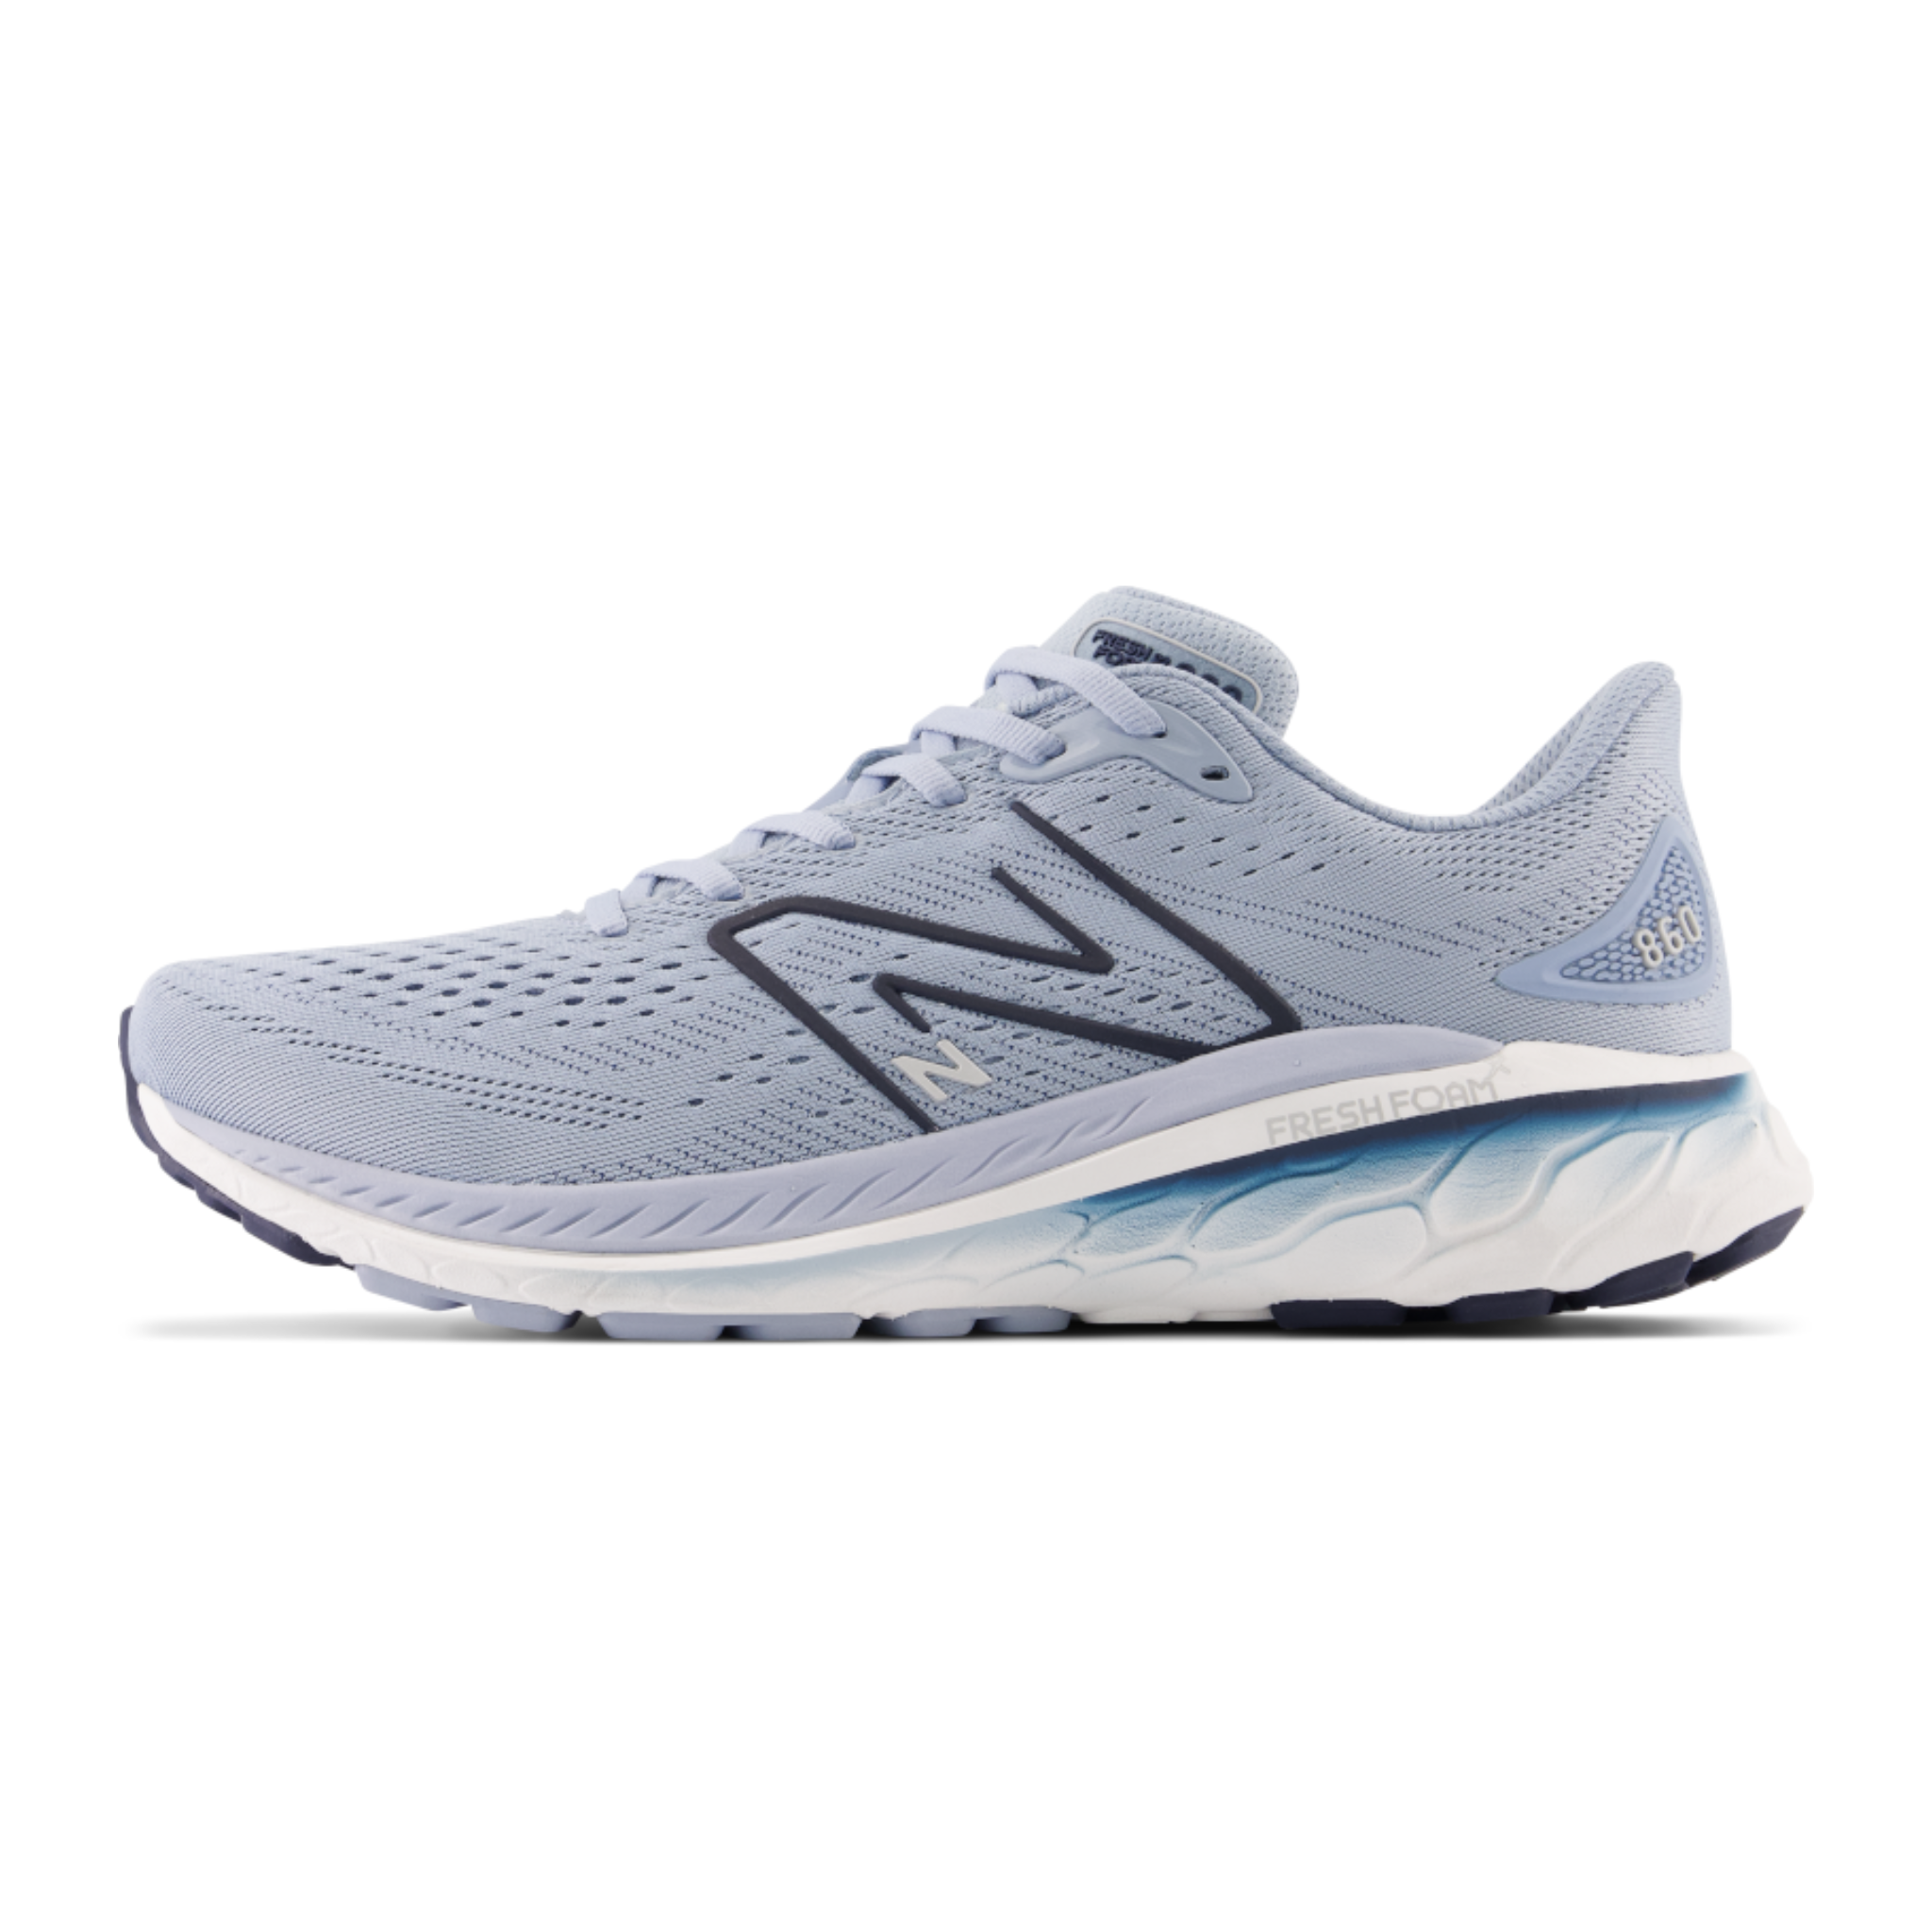 MEN'S NEW BALANCE 860 V13 WIDE 2E | Performance Running Outfitters